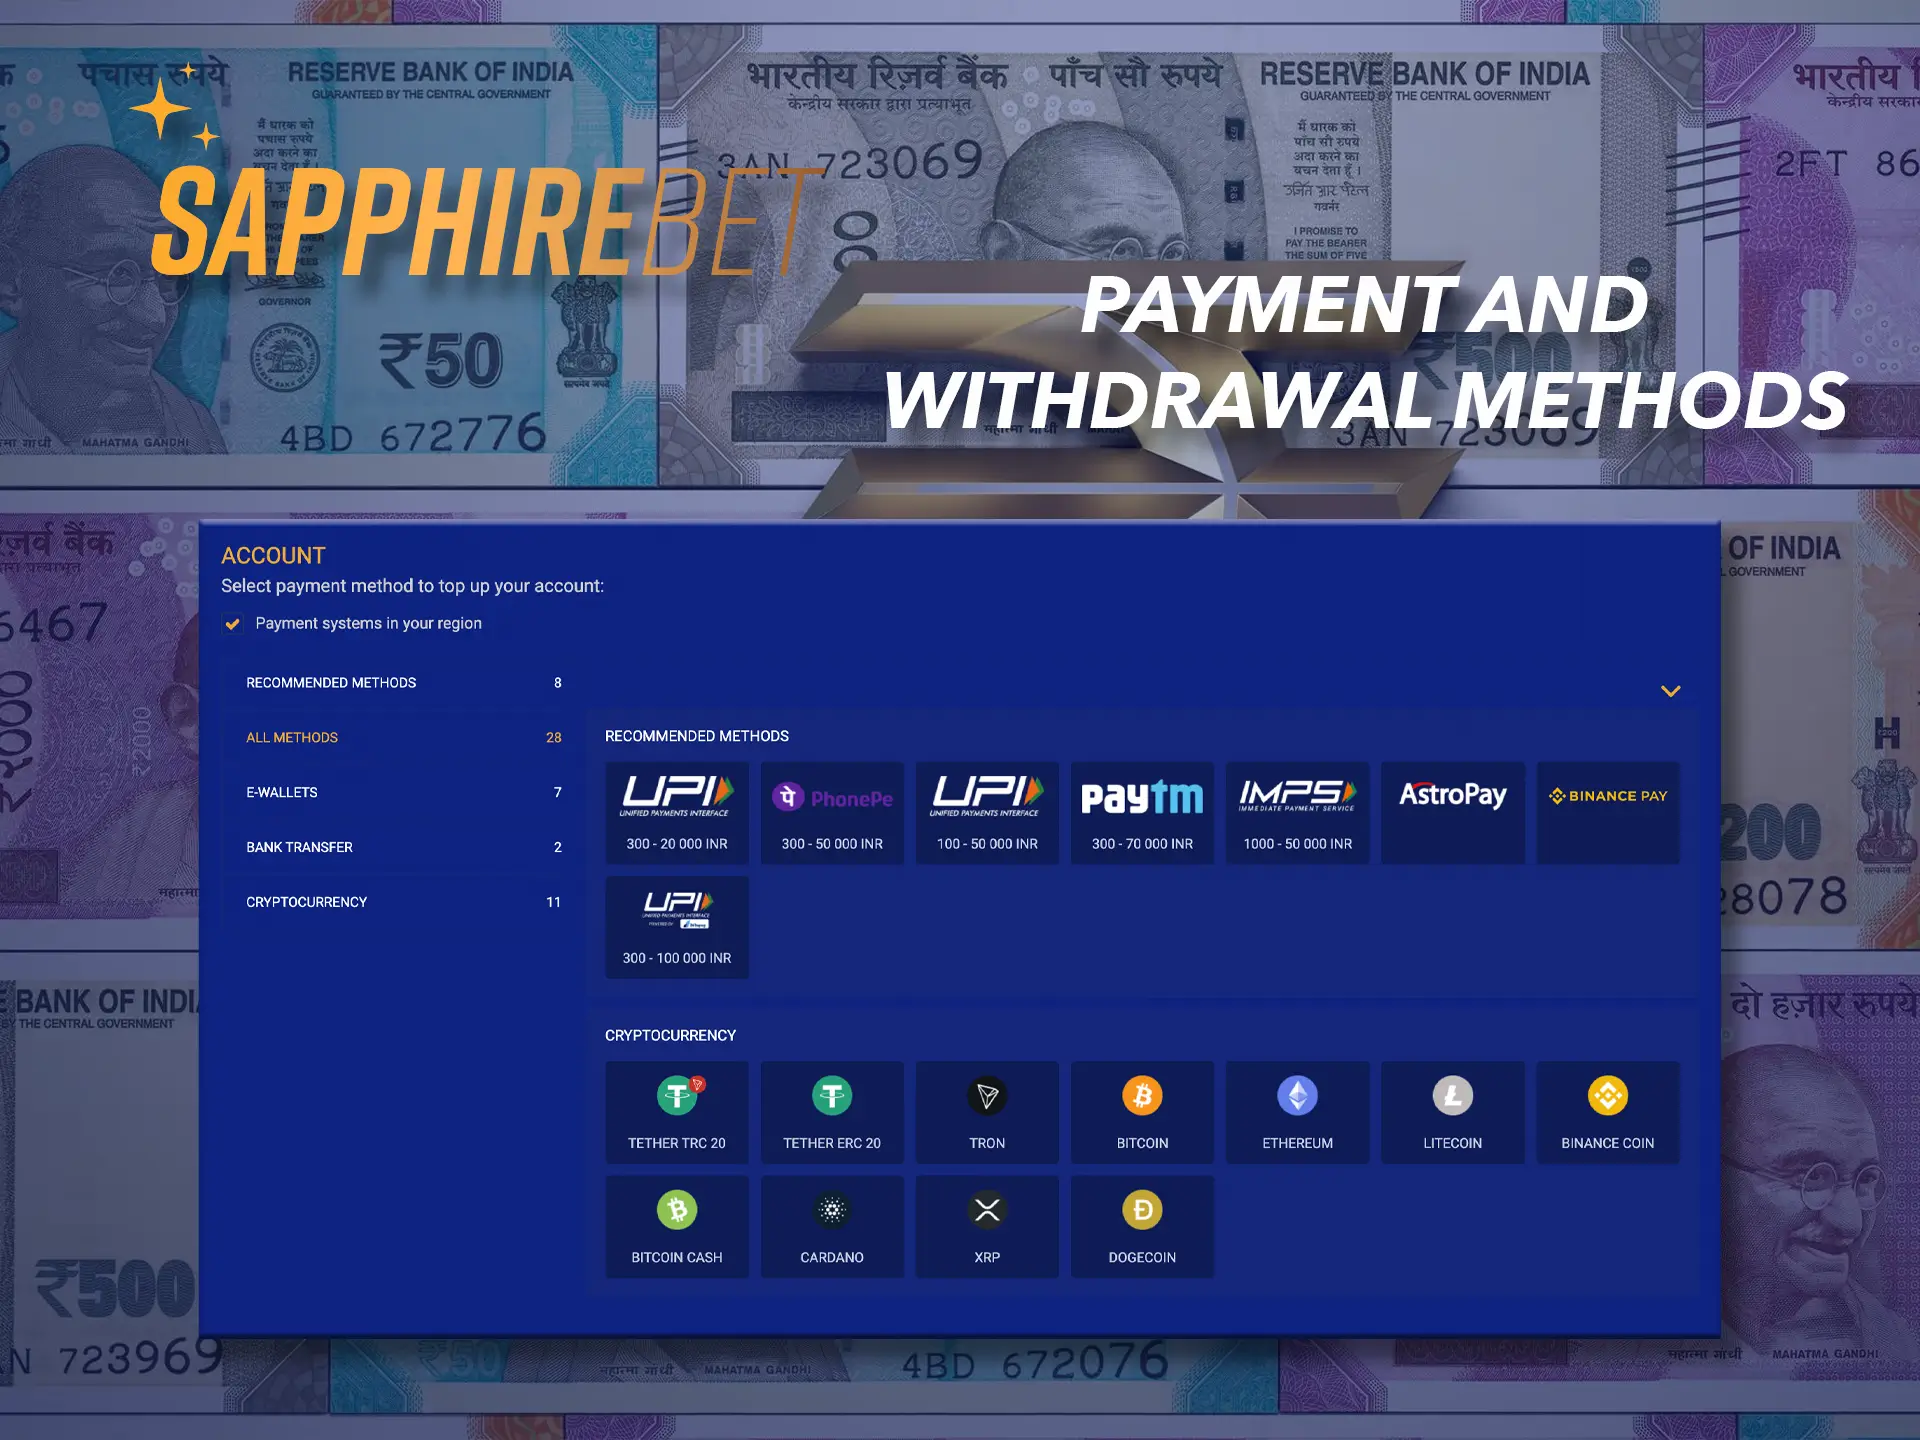 Decide on the deposit method you need and convenient for you at Sapphirebet Casino.